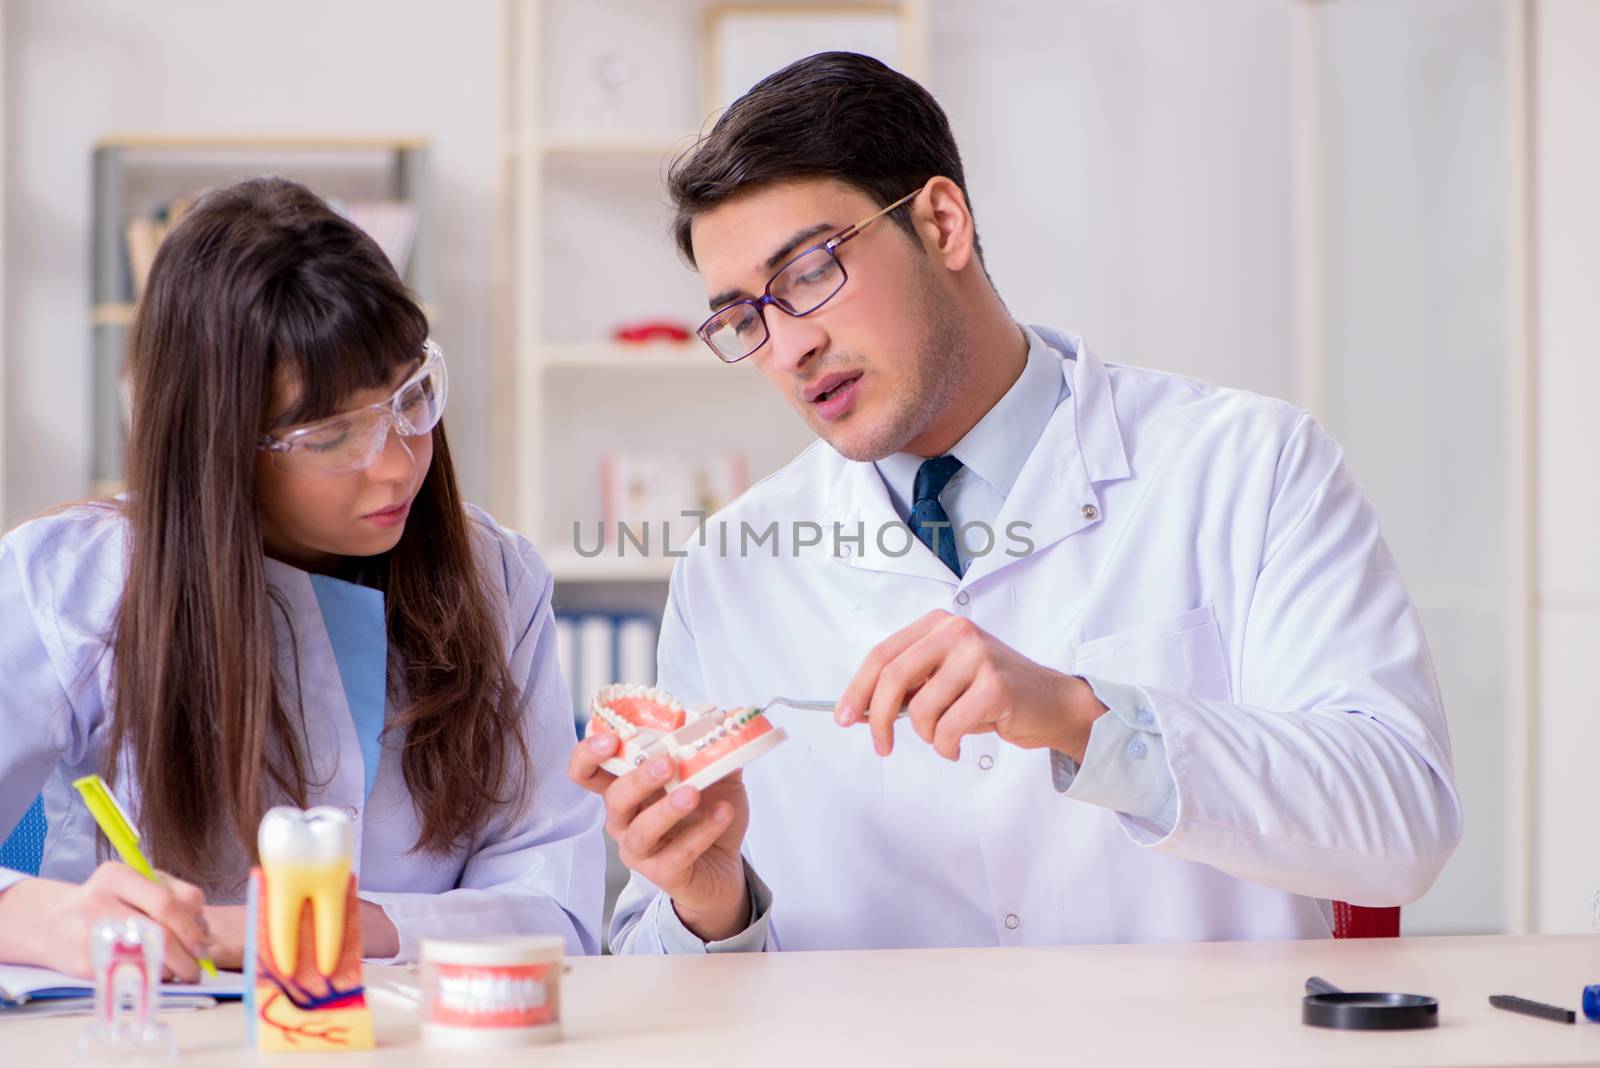 Dentist explaining student tooth structure